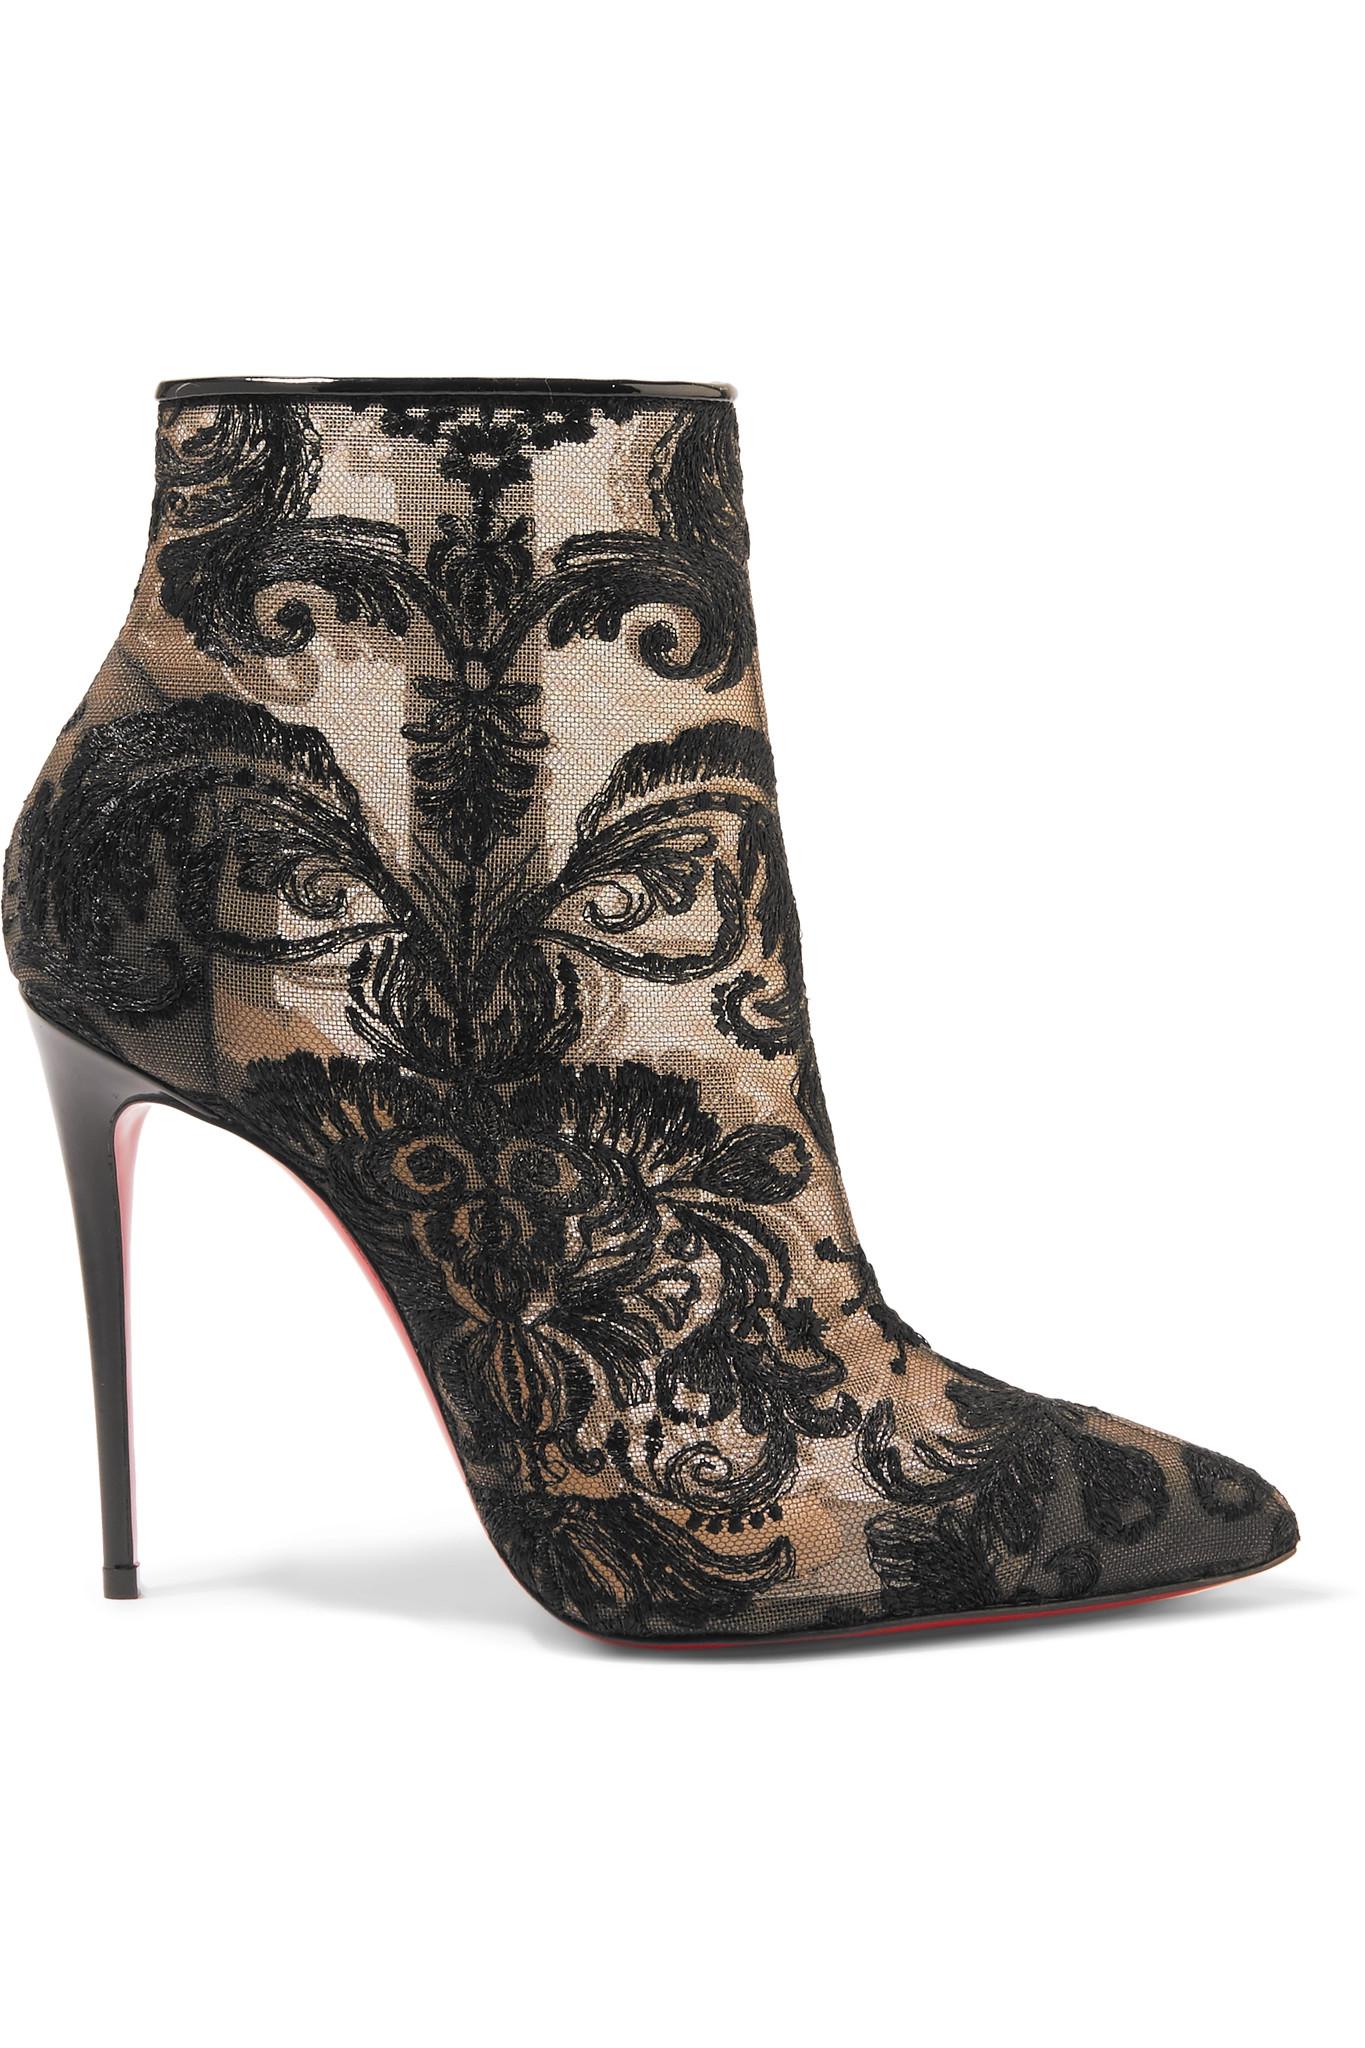 Christian Louboutin Gipsy 100 Guipure Lace Ankle Boots in Black | Lyst  Canada